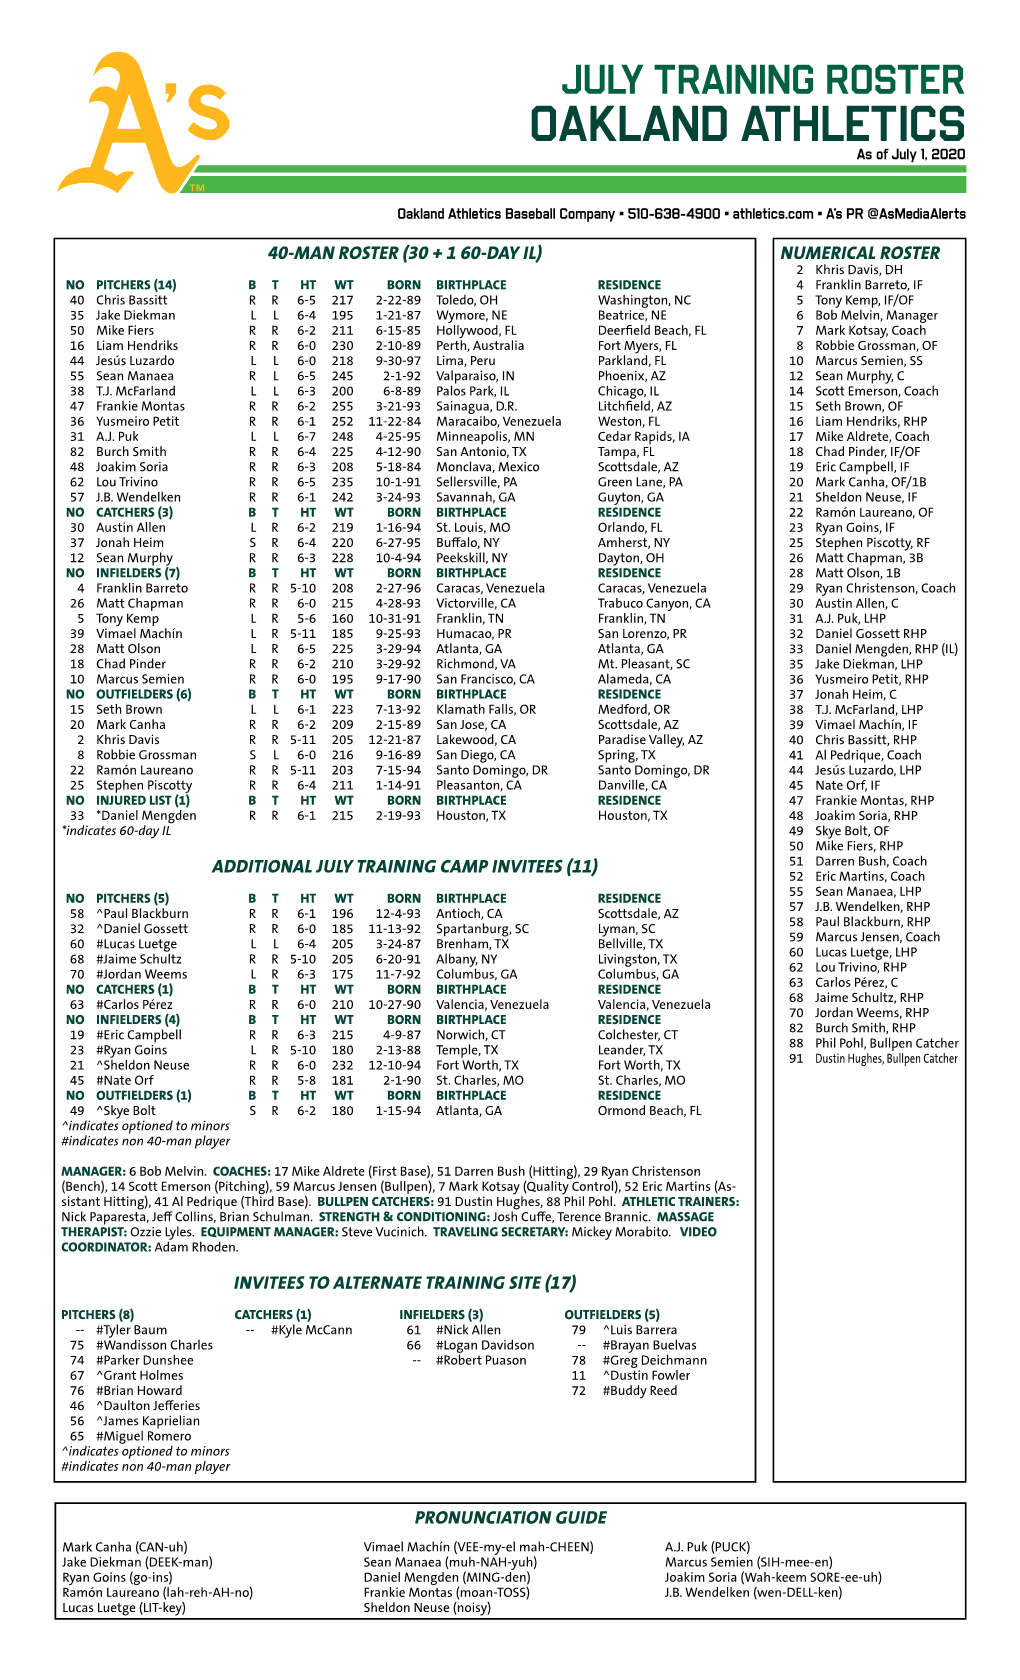 07-01-2020 A's Roster